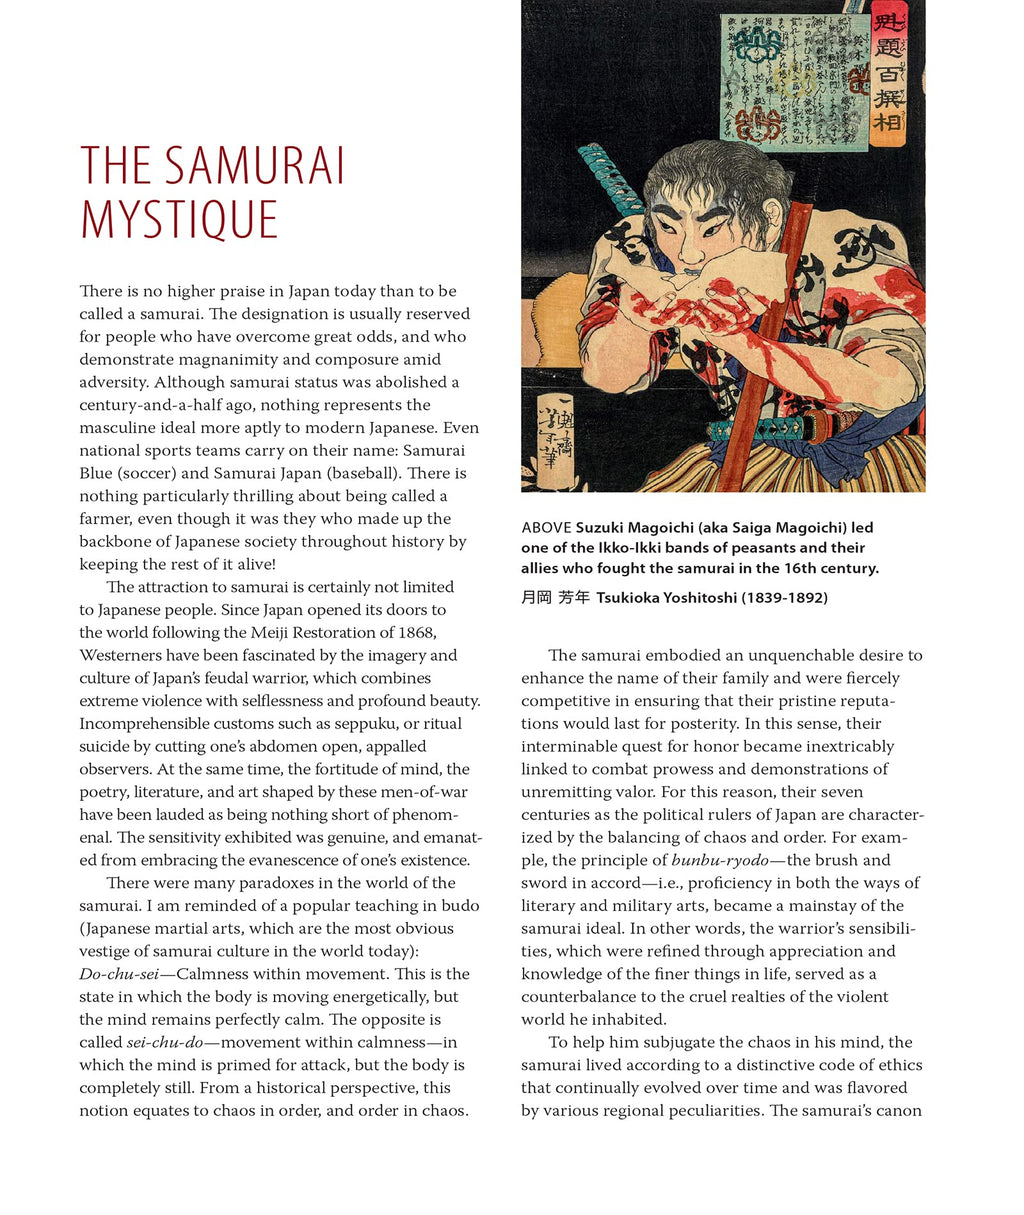 An Illustrated Guide to Samurai History and Culture